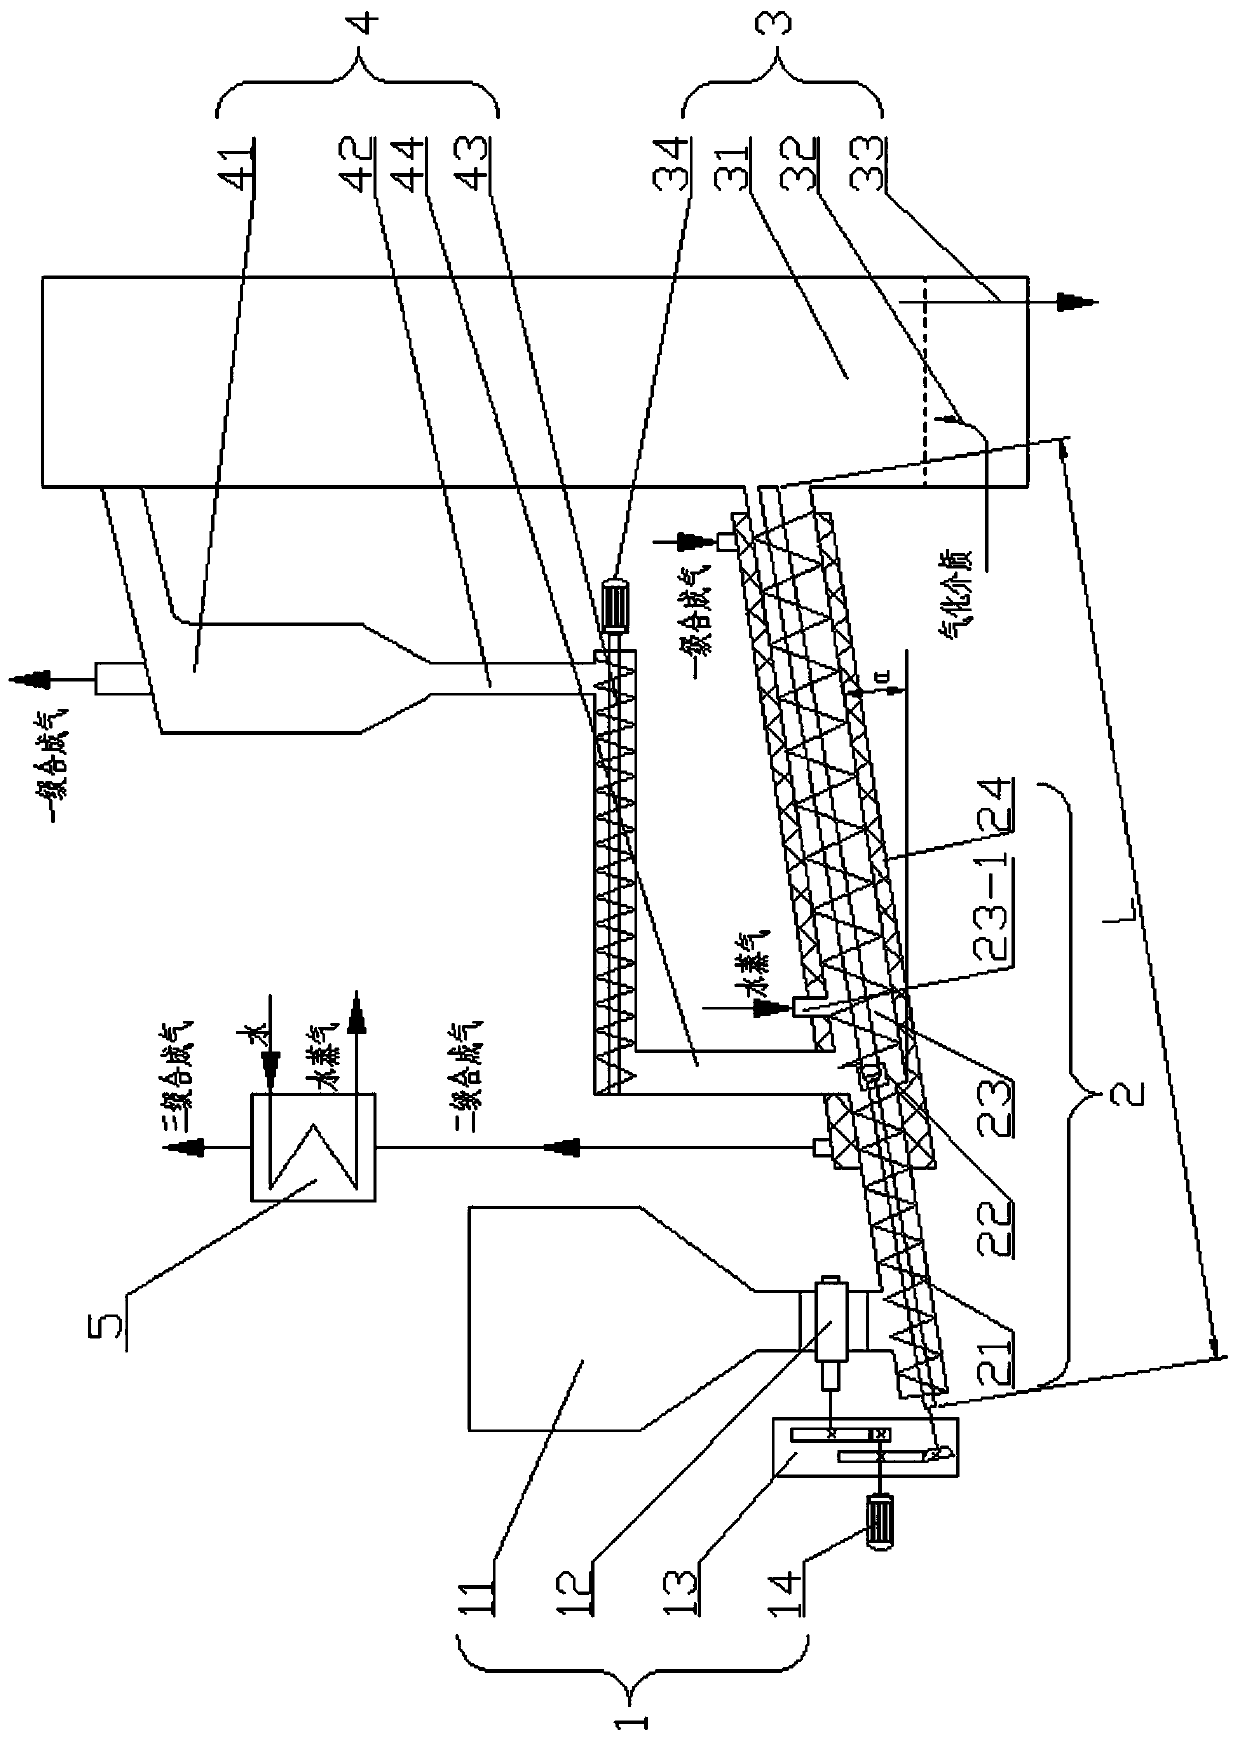 Low-temperature gasification device for low-order fuel based on spiral pyrolyzer and fluidized bed gasifier